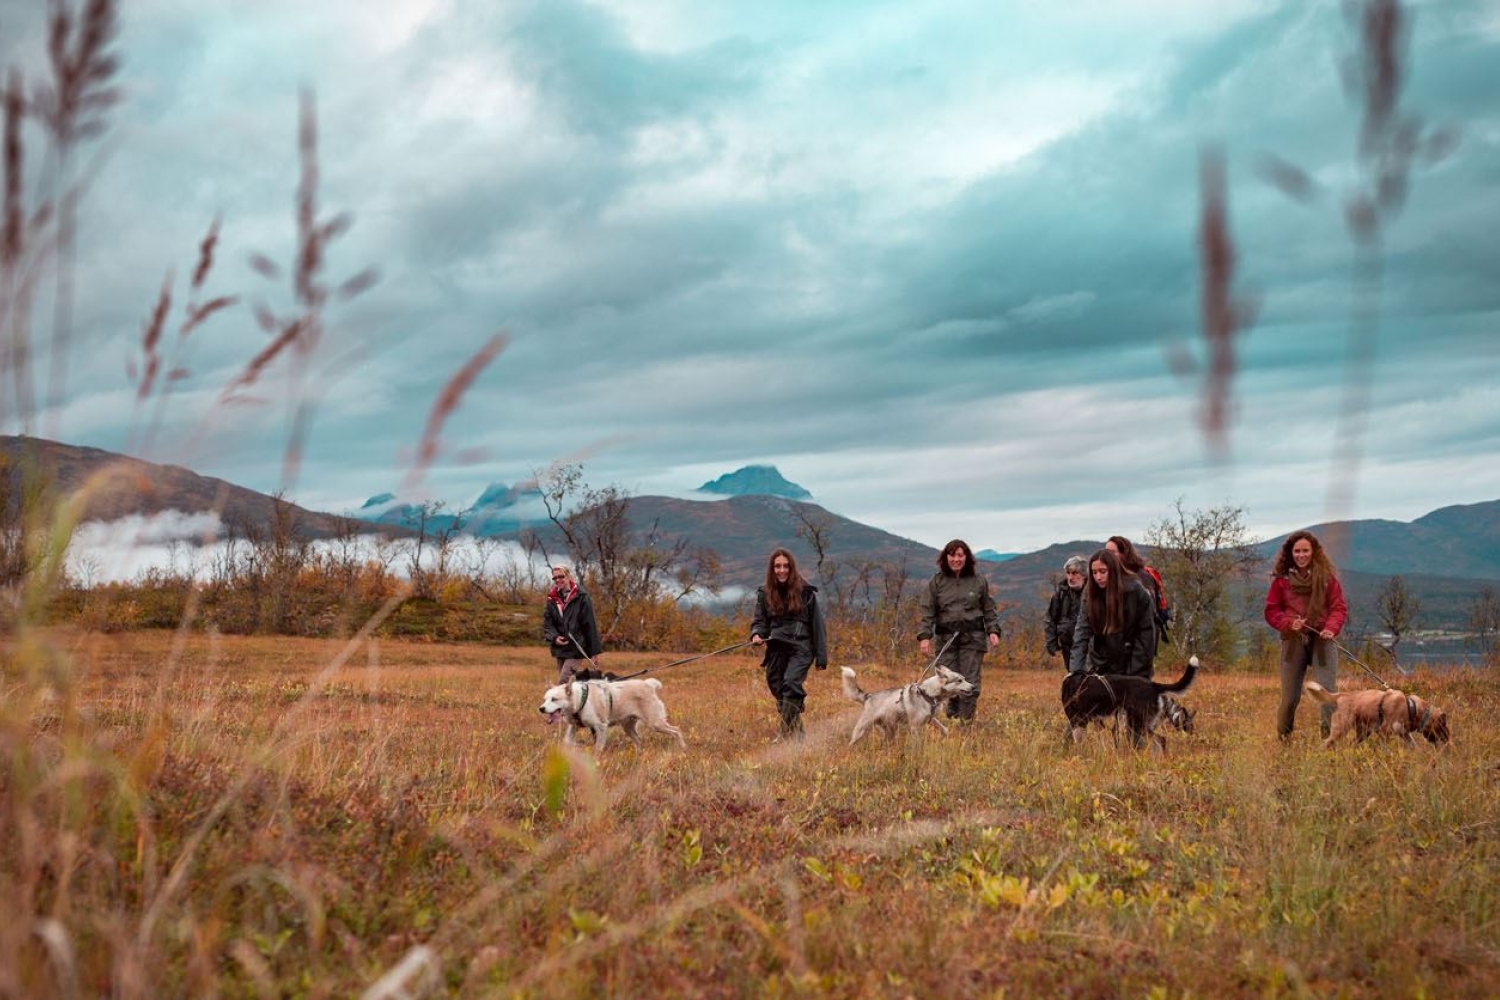 Small group trekking with huskies in an Arctic fall landscape